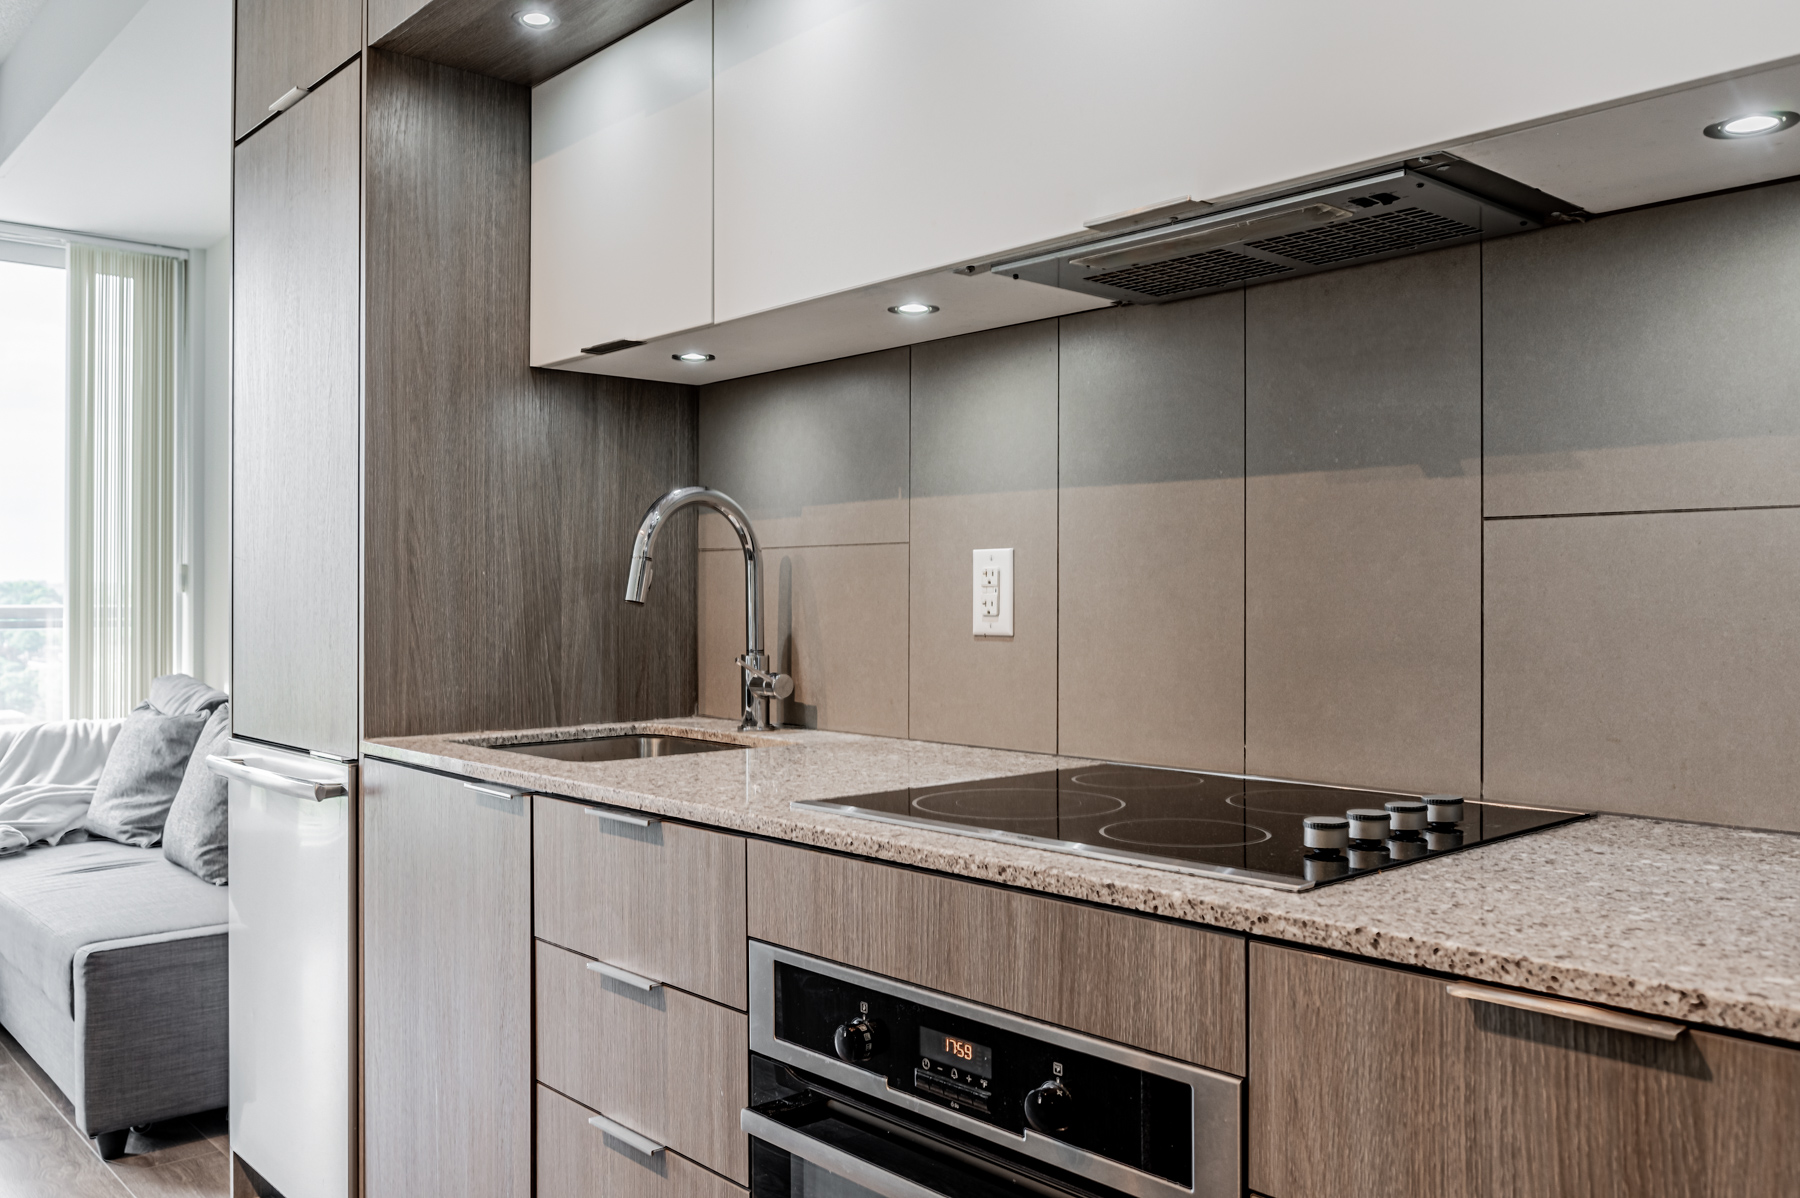 Beautiful condo kitchen with quartz countertops, large tile back-splash and wooden cabinets.